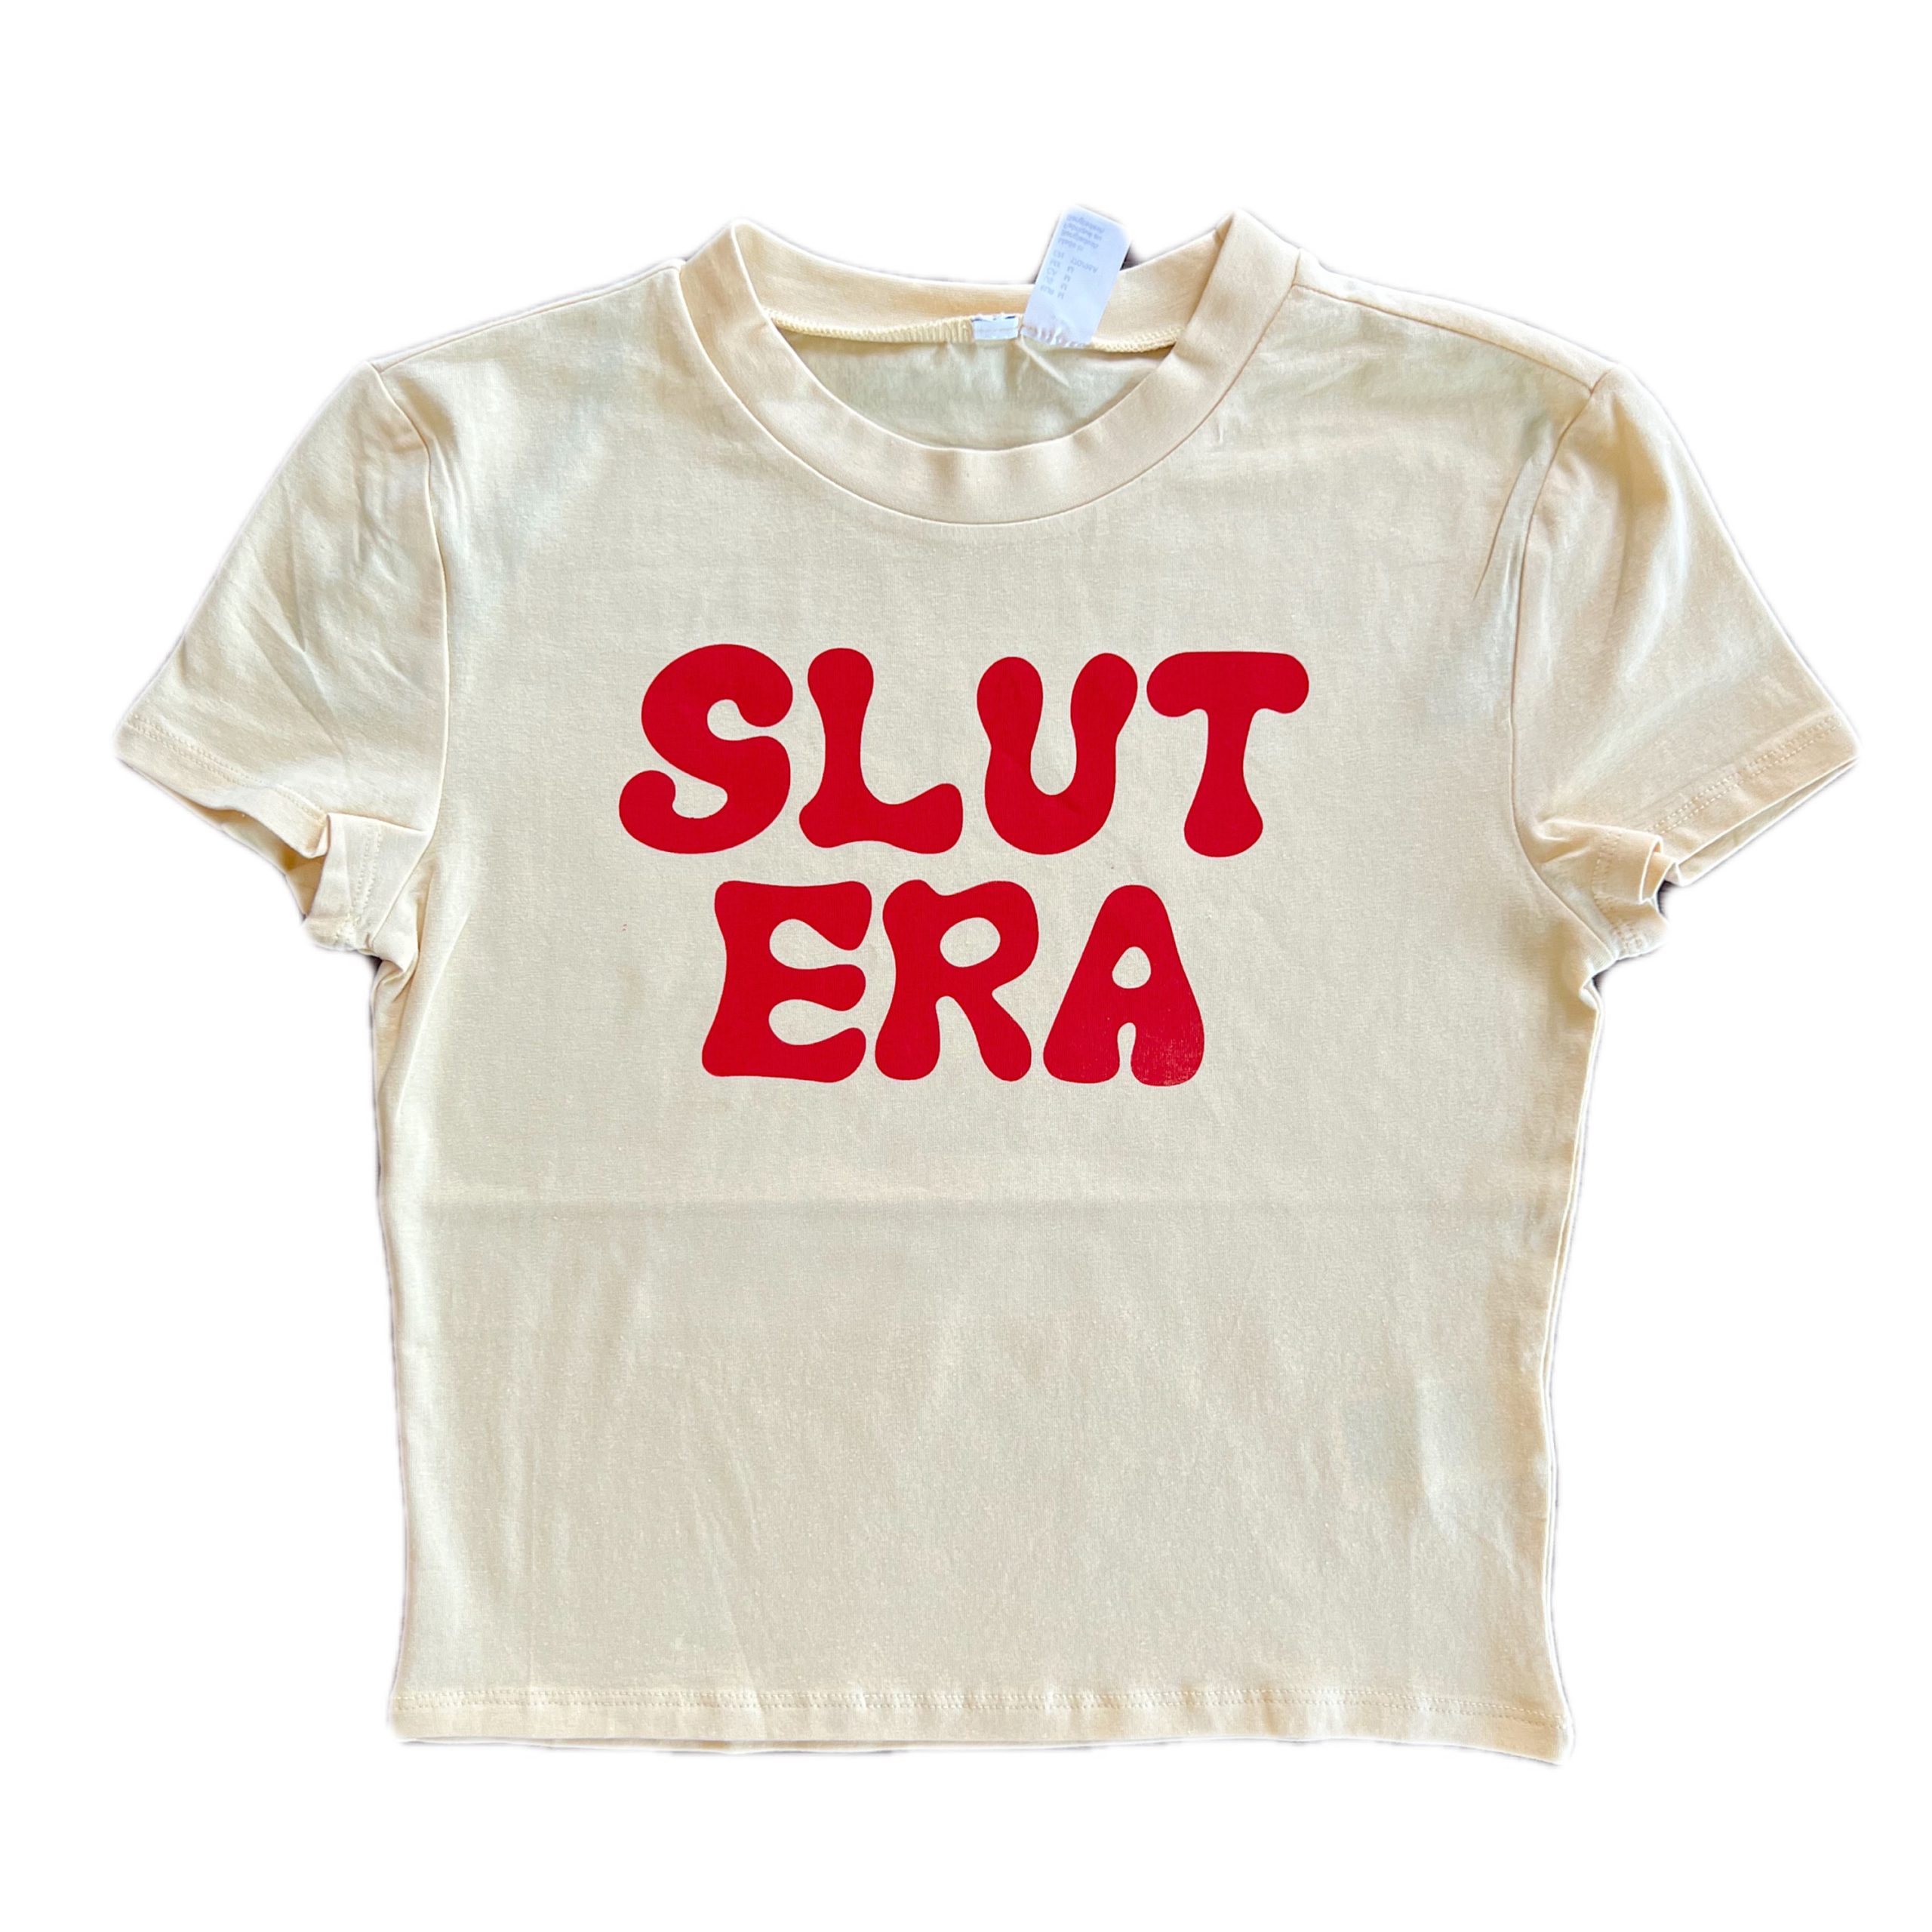 Vintage-inspired Slut Era baby tee with trendy Y2K aesthetic and graphic print